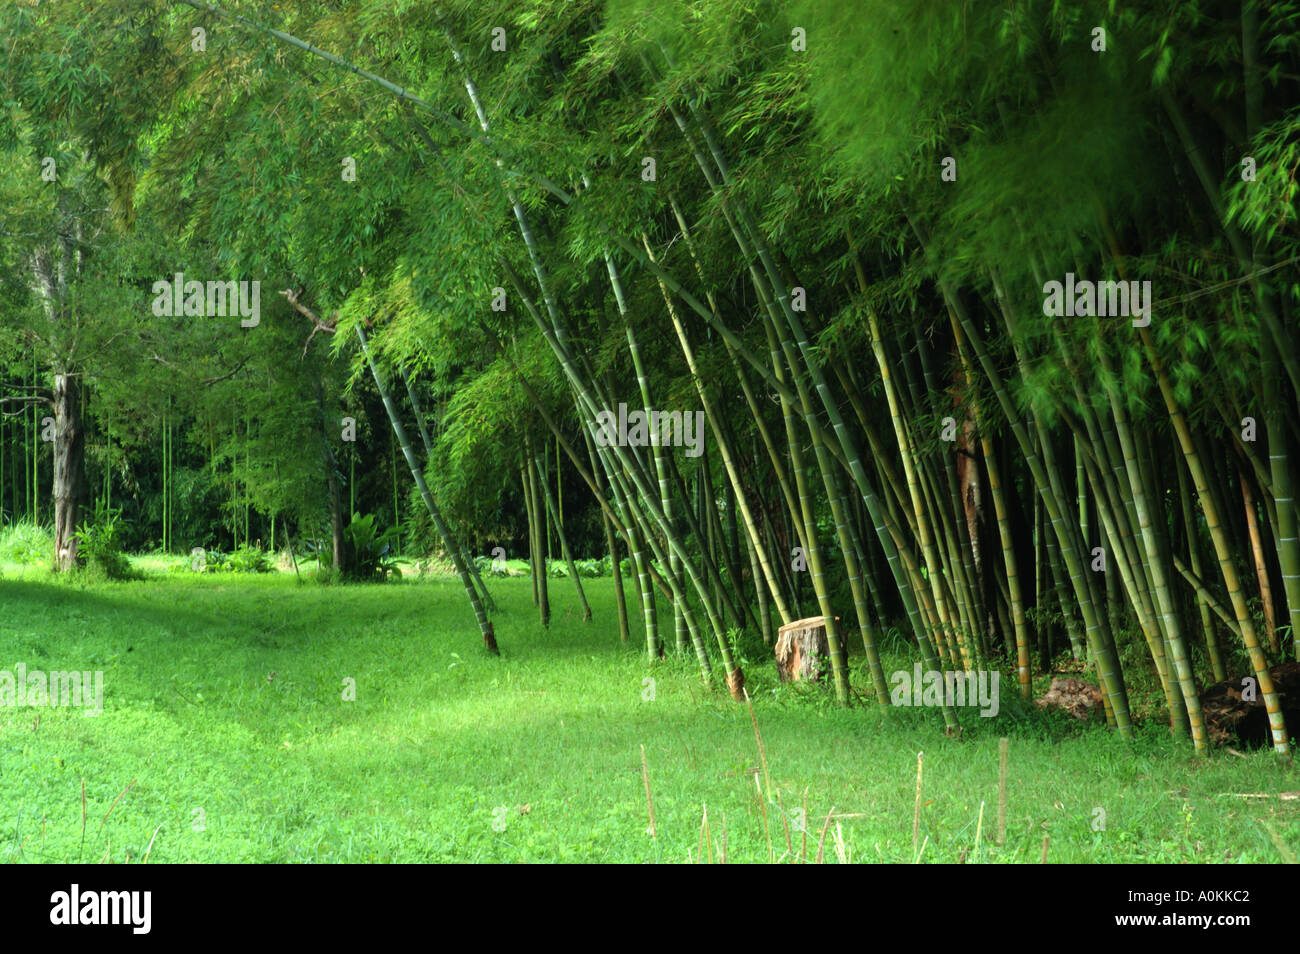 Moso Bamboo Scientific name Phyllostachys Pubescens growing in Queensland Australia dsc 9064 Stock Photo